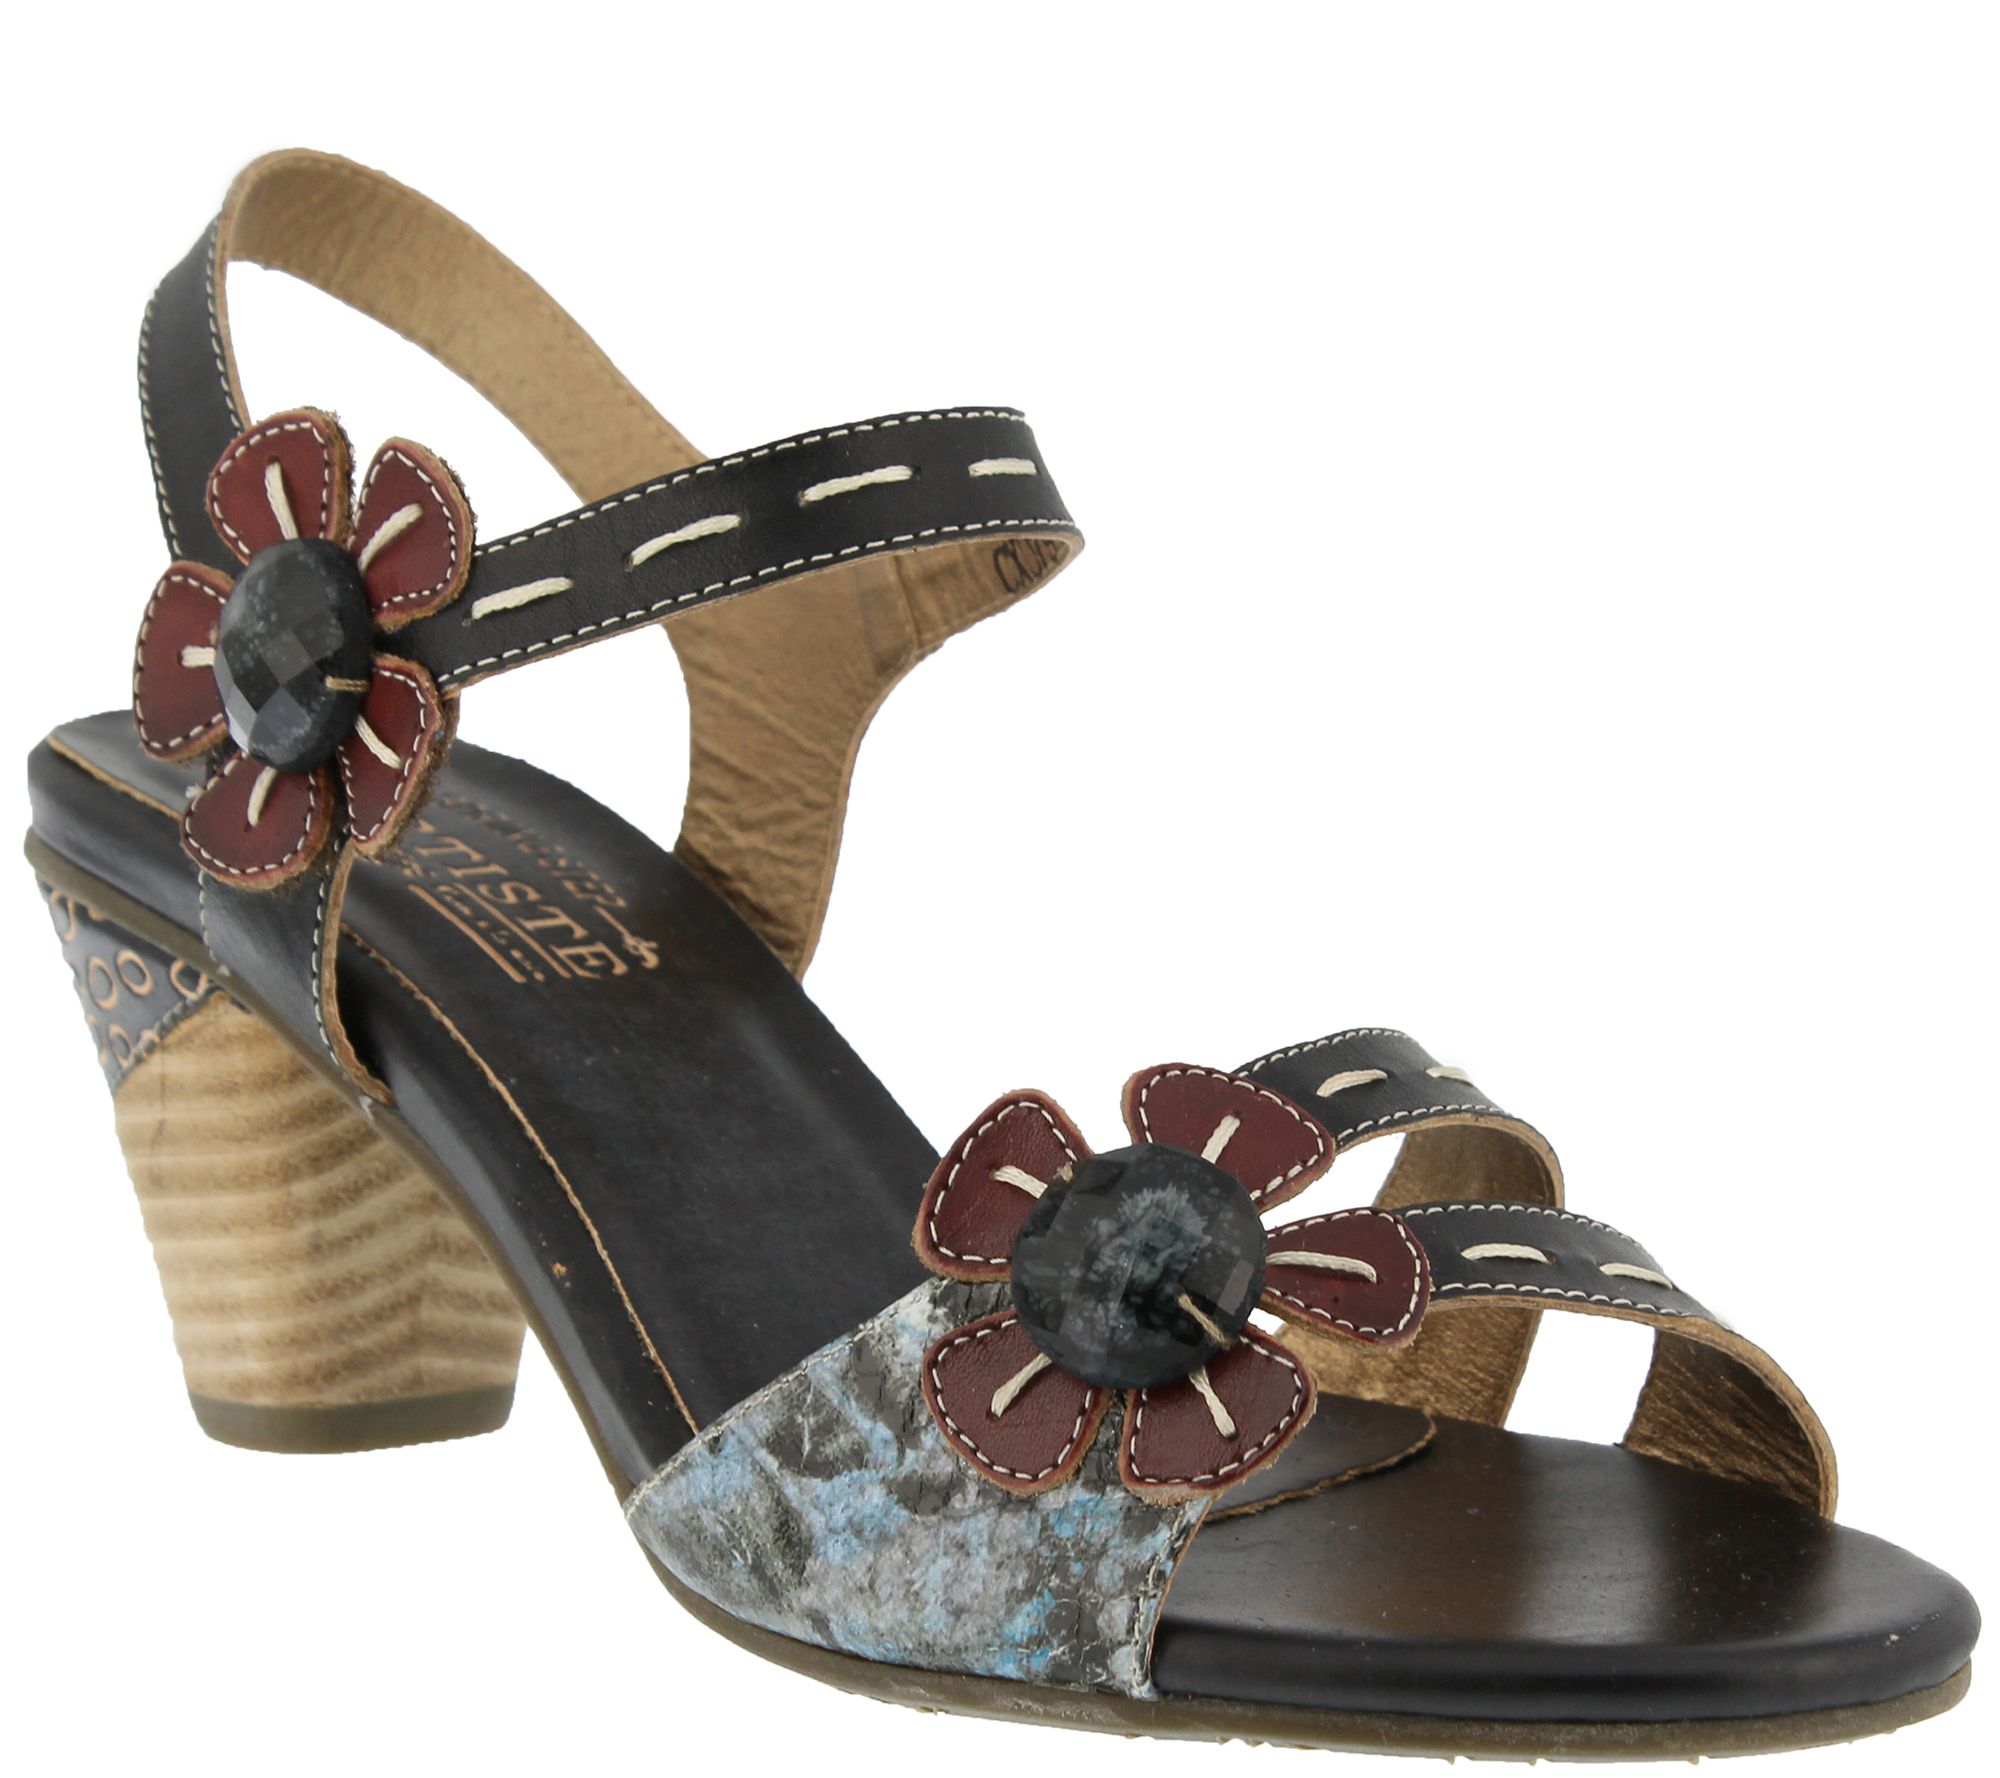 L'Artiste by Spring Step Leather Sandals- Guiditta — QVC.com